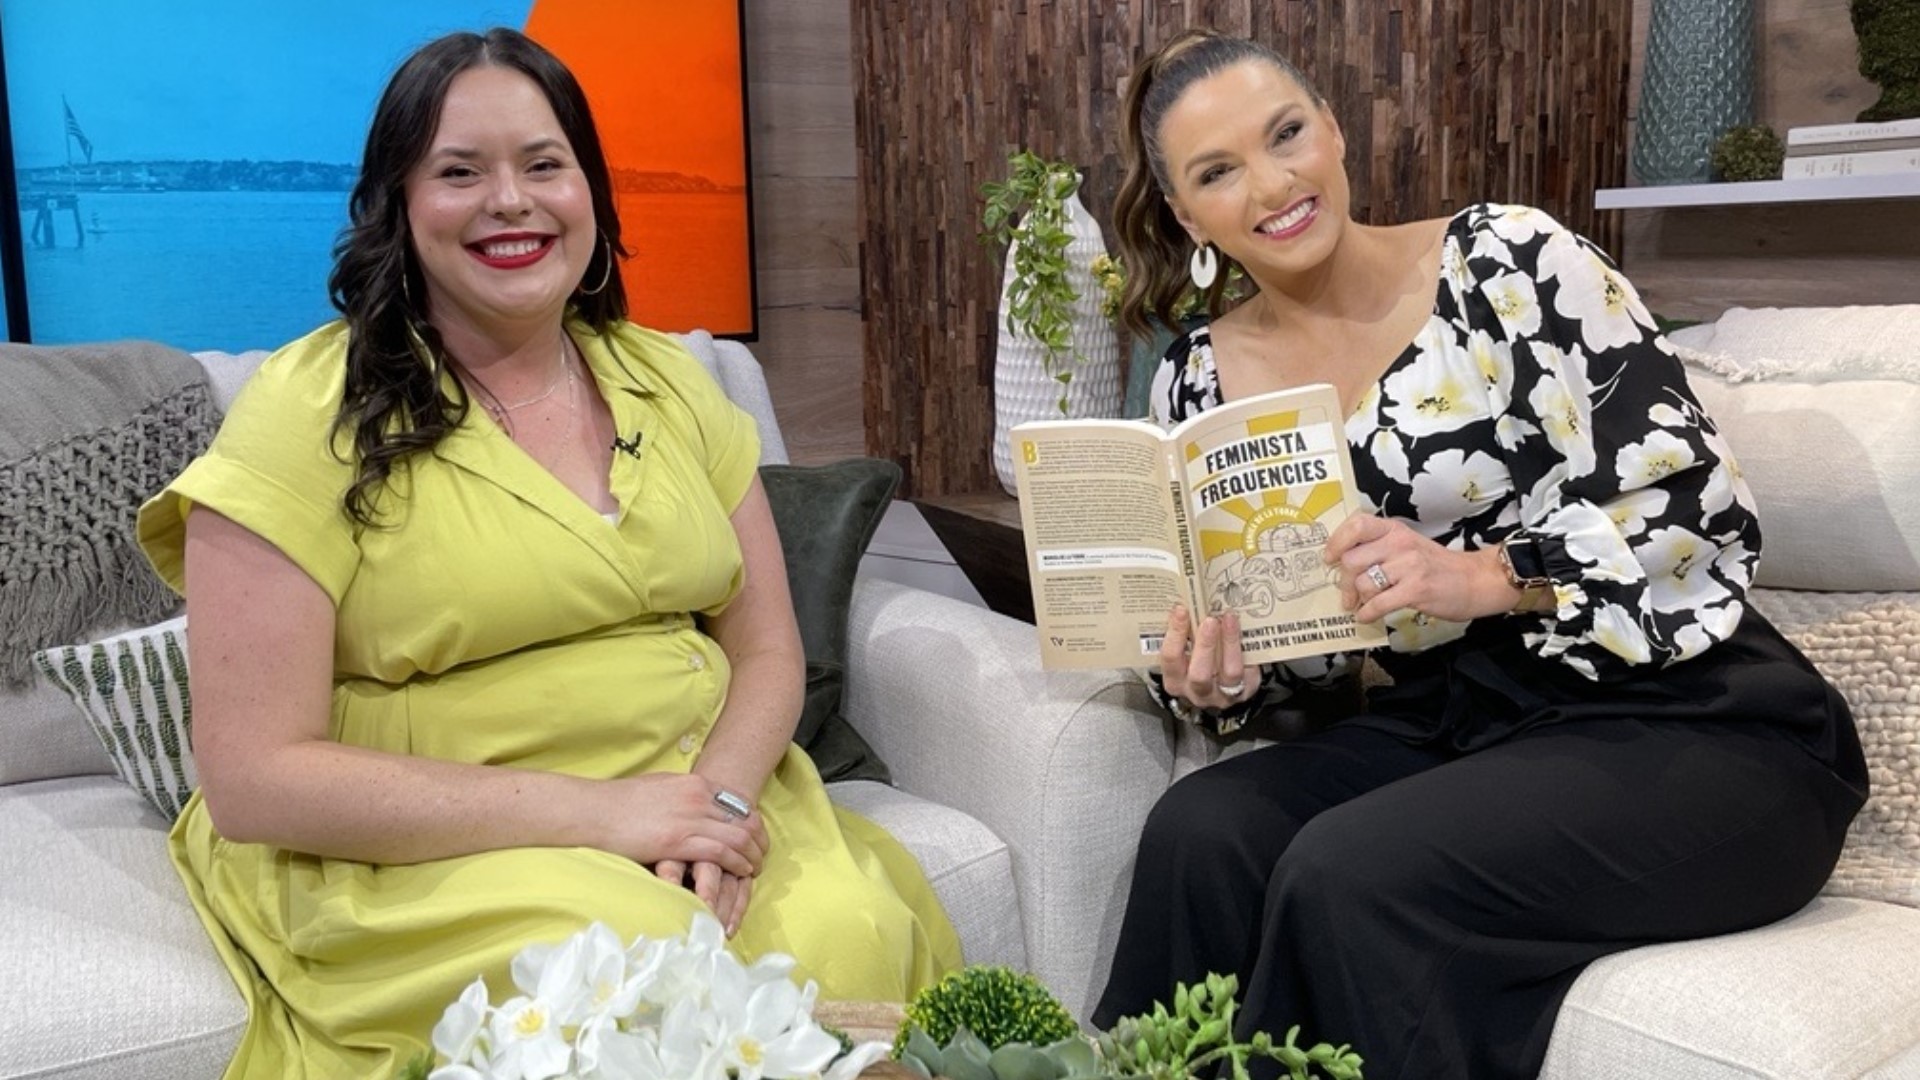 "Feminista Frequencies" by Monica De La Torre takes a look at one of the first full-time Spanish language community radio stations in the country. #newdaynw